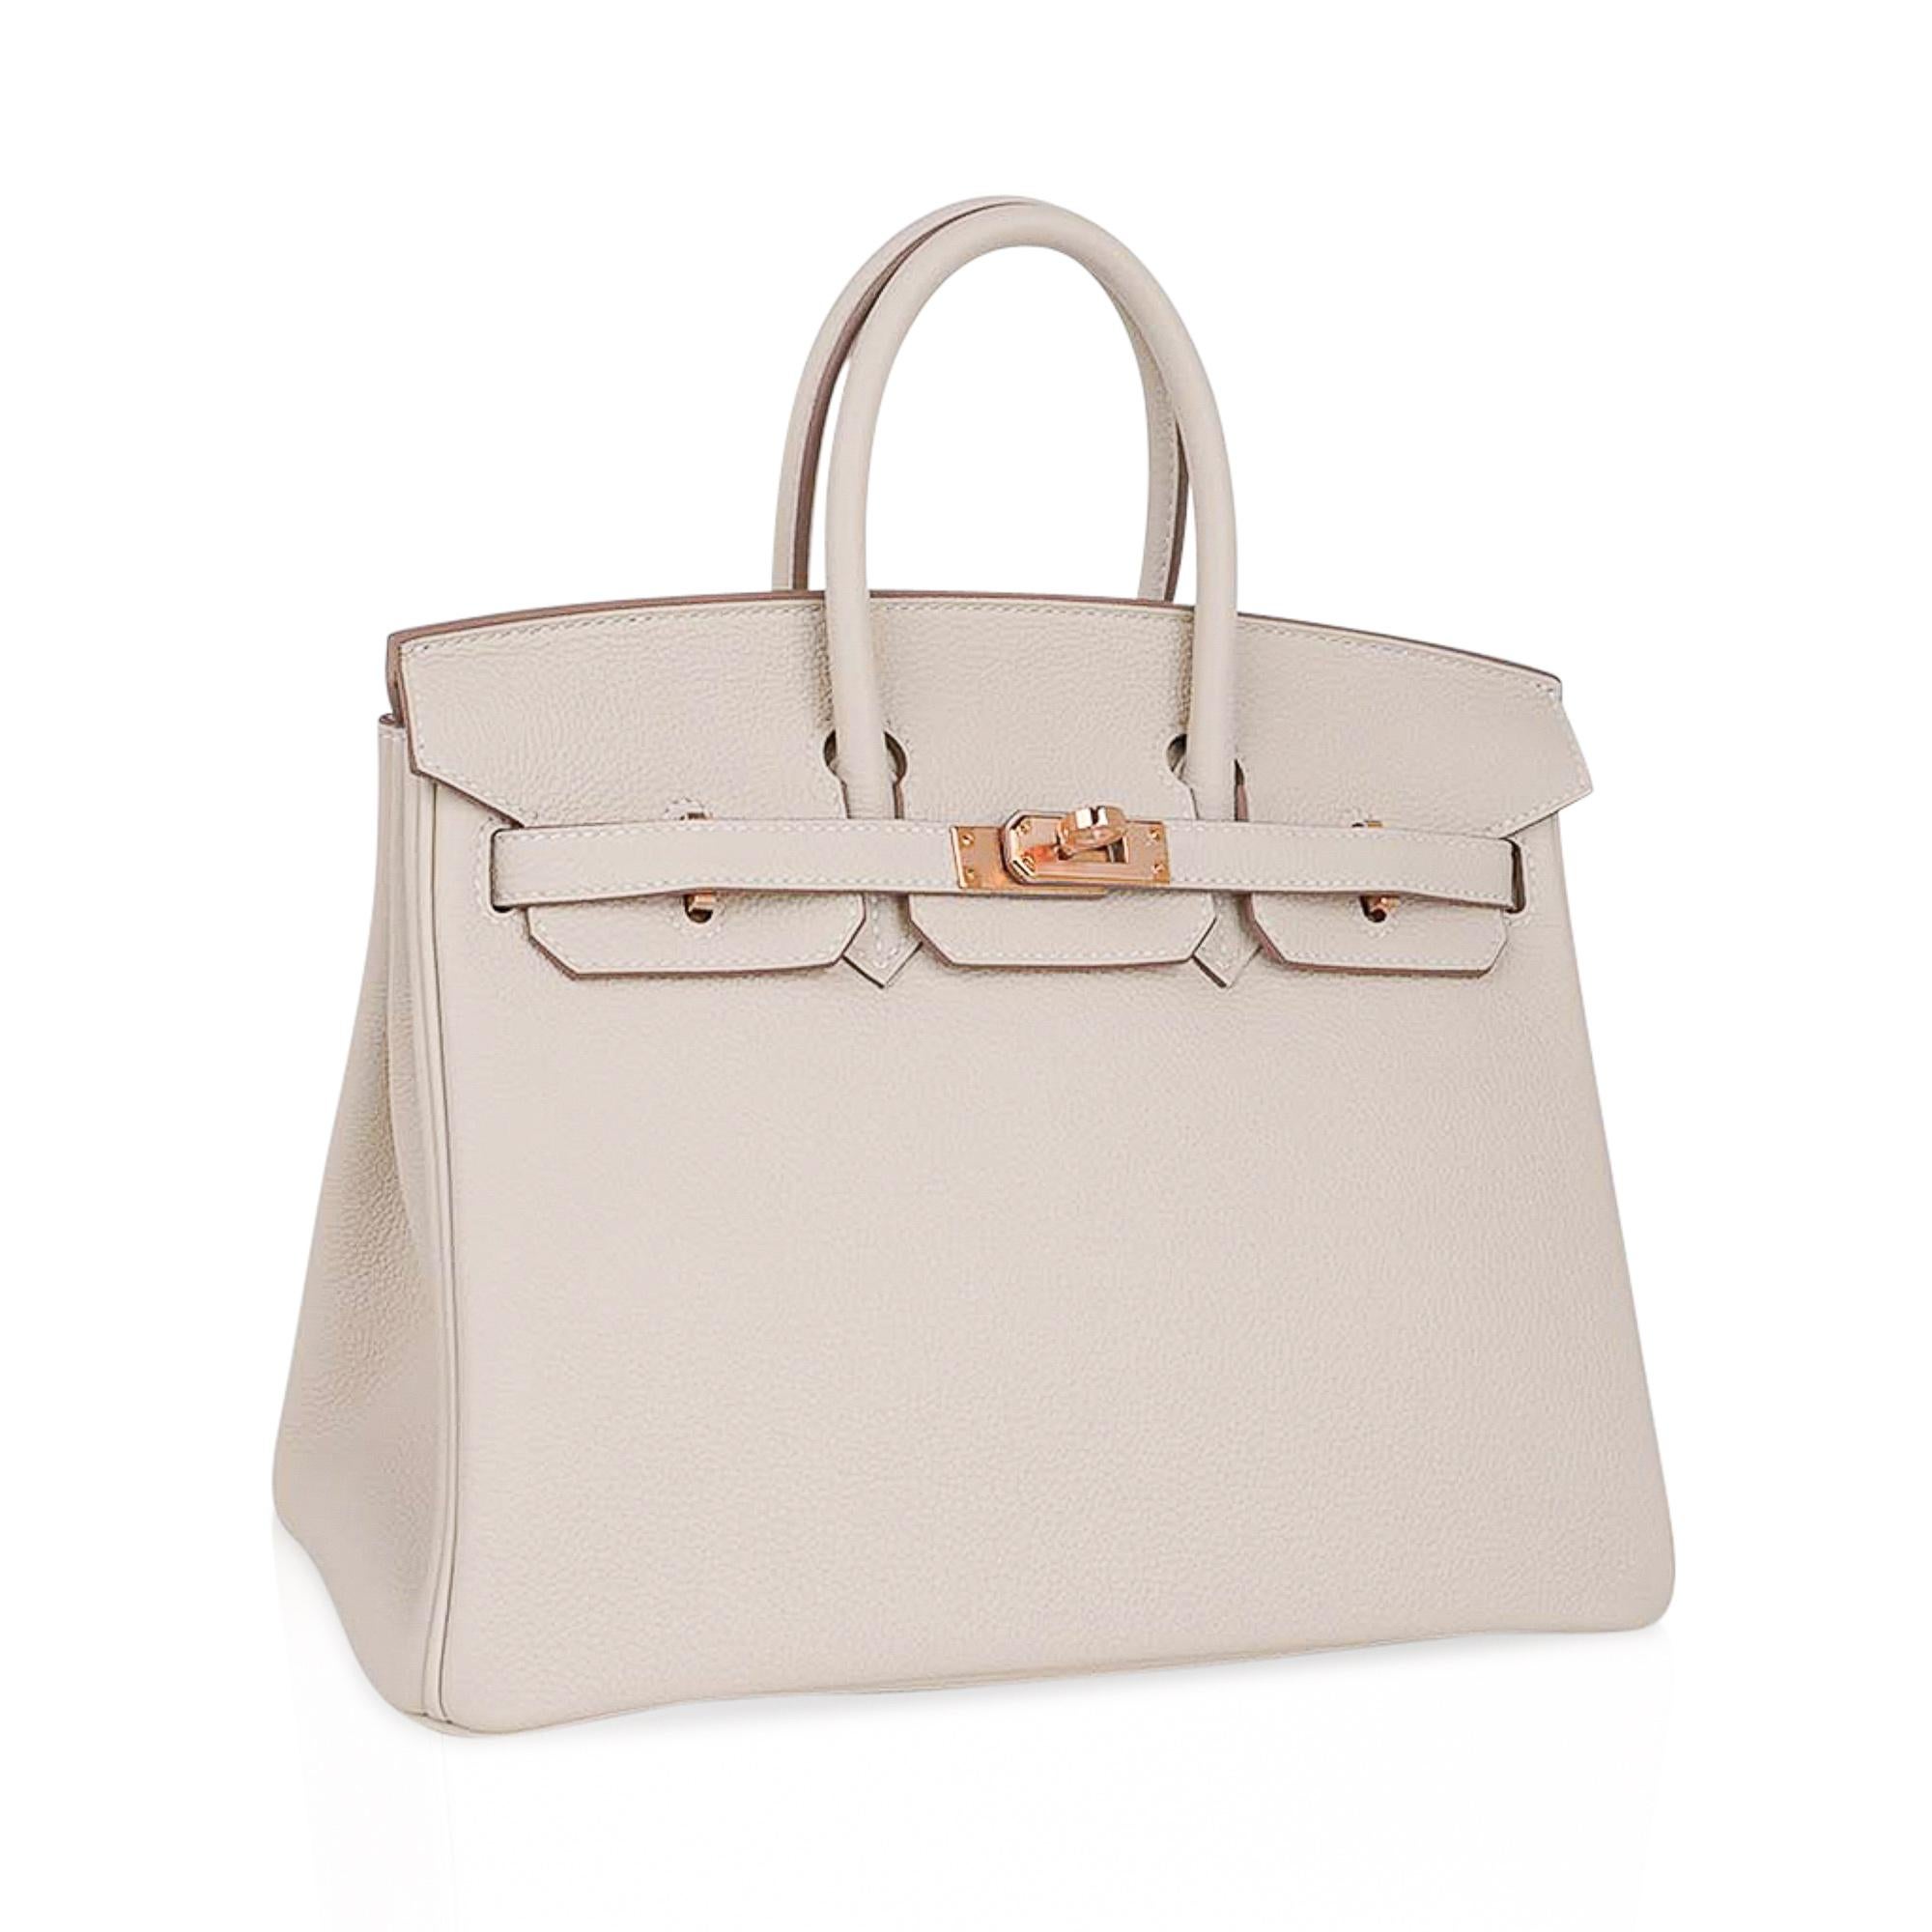 Mightychic offers an Hermes Birkin 25 bag featured in Craie.
This subtle neutral colour is perfect for year round wear.
Accentuated with coveted Rose Gold hardware.
Comes with the lock and keys in the clochette, signature Hermes box, sleeper and